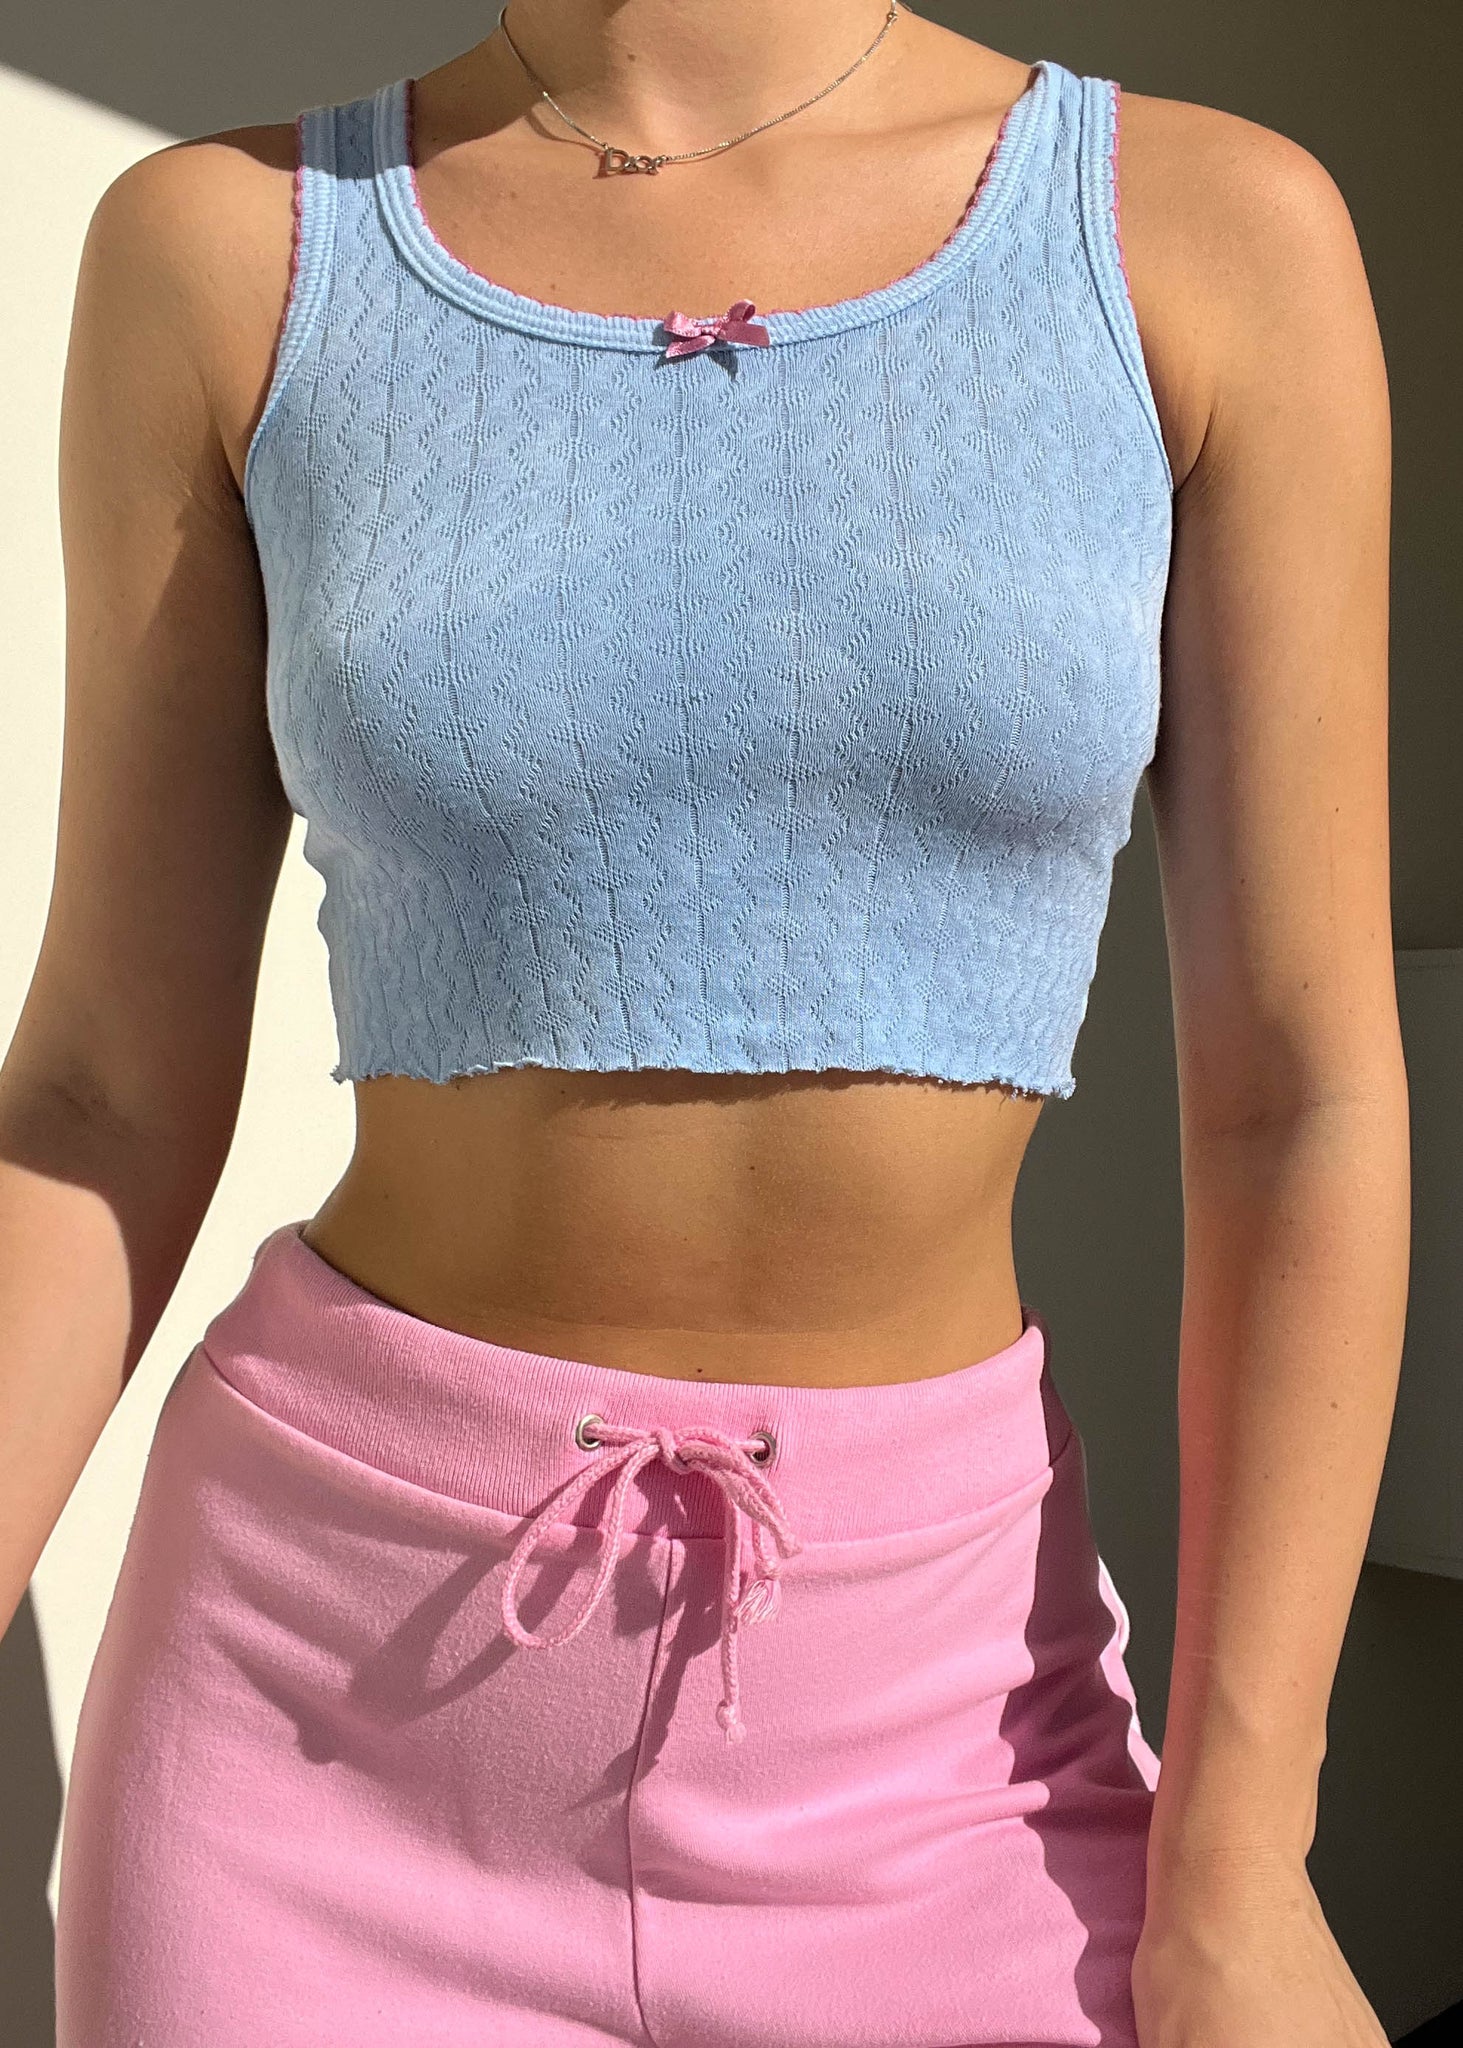 Cotton Candy Baby Doll Tank (XS-S)